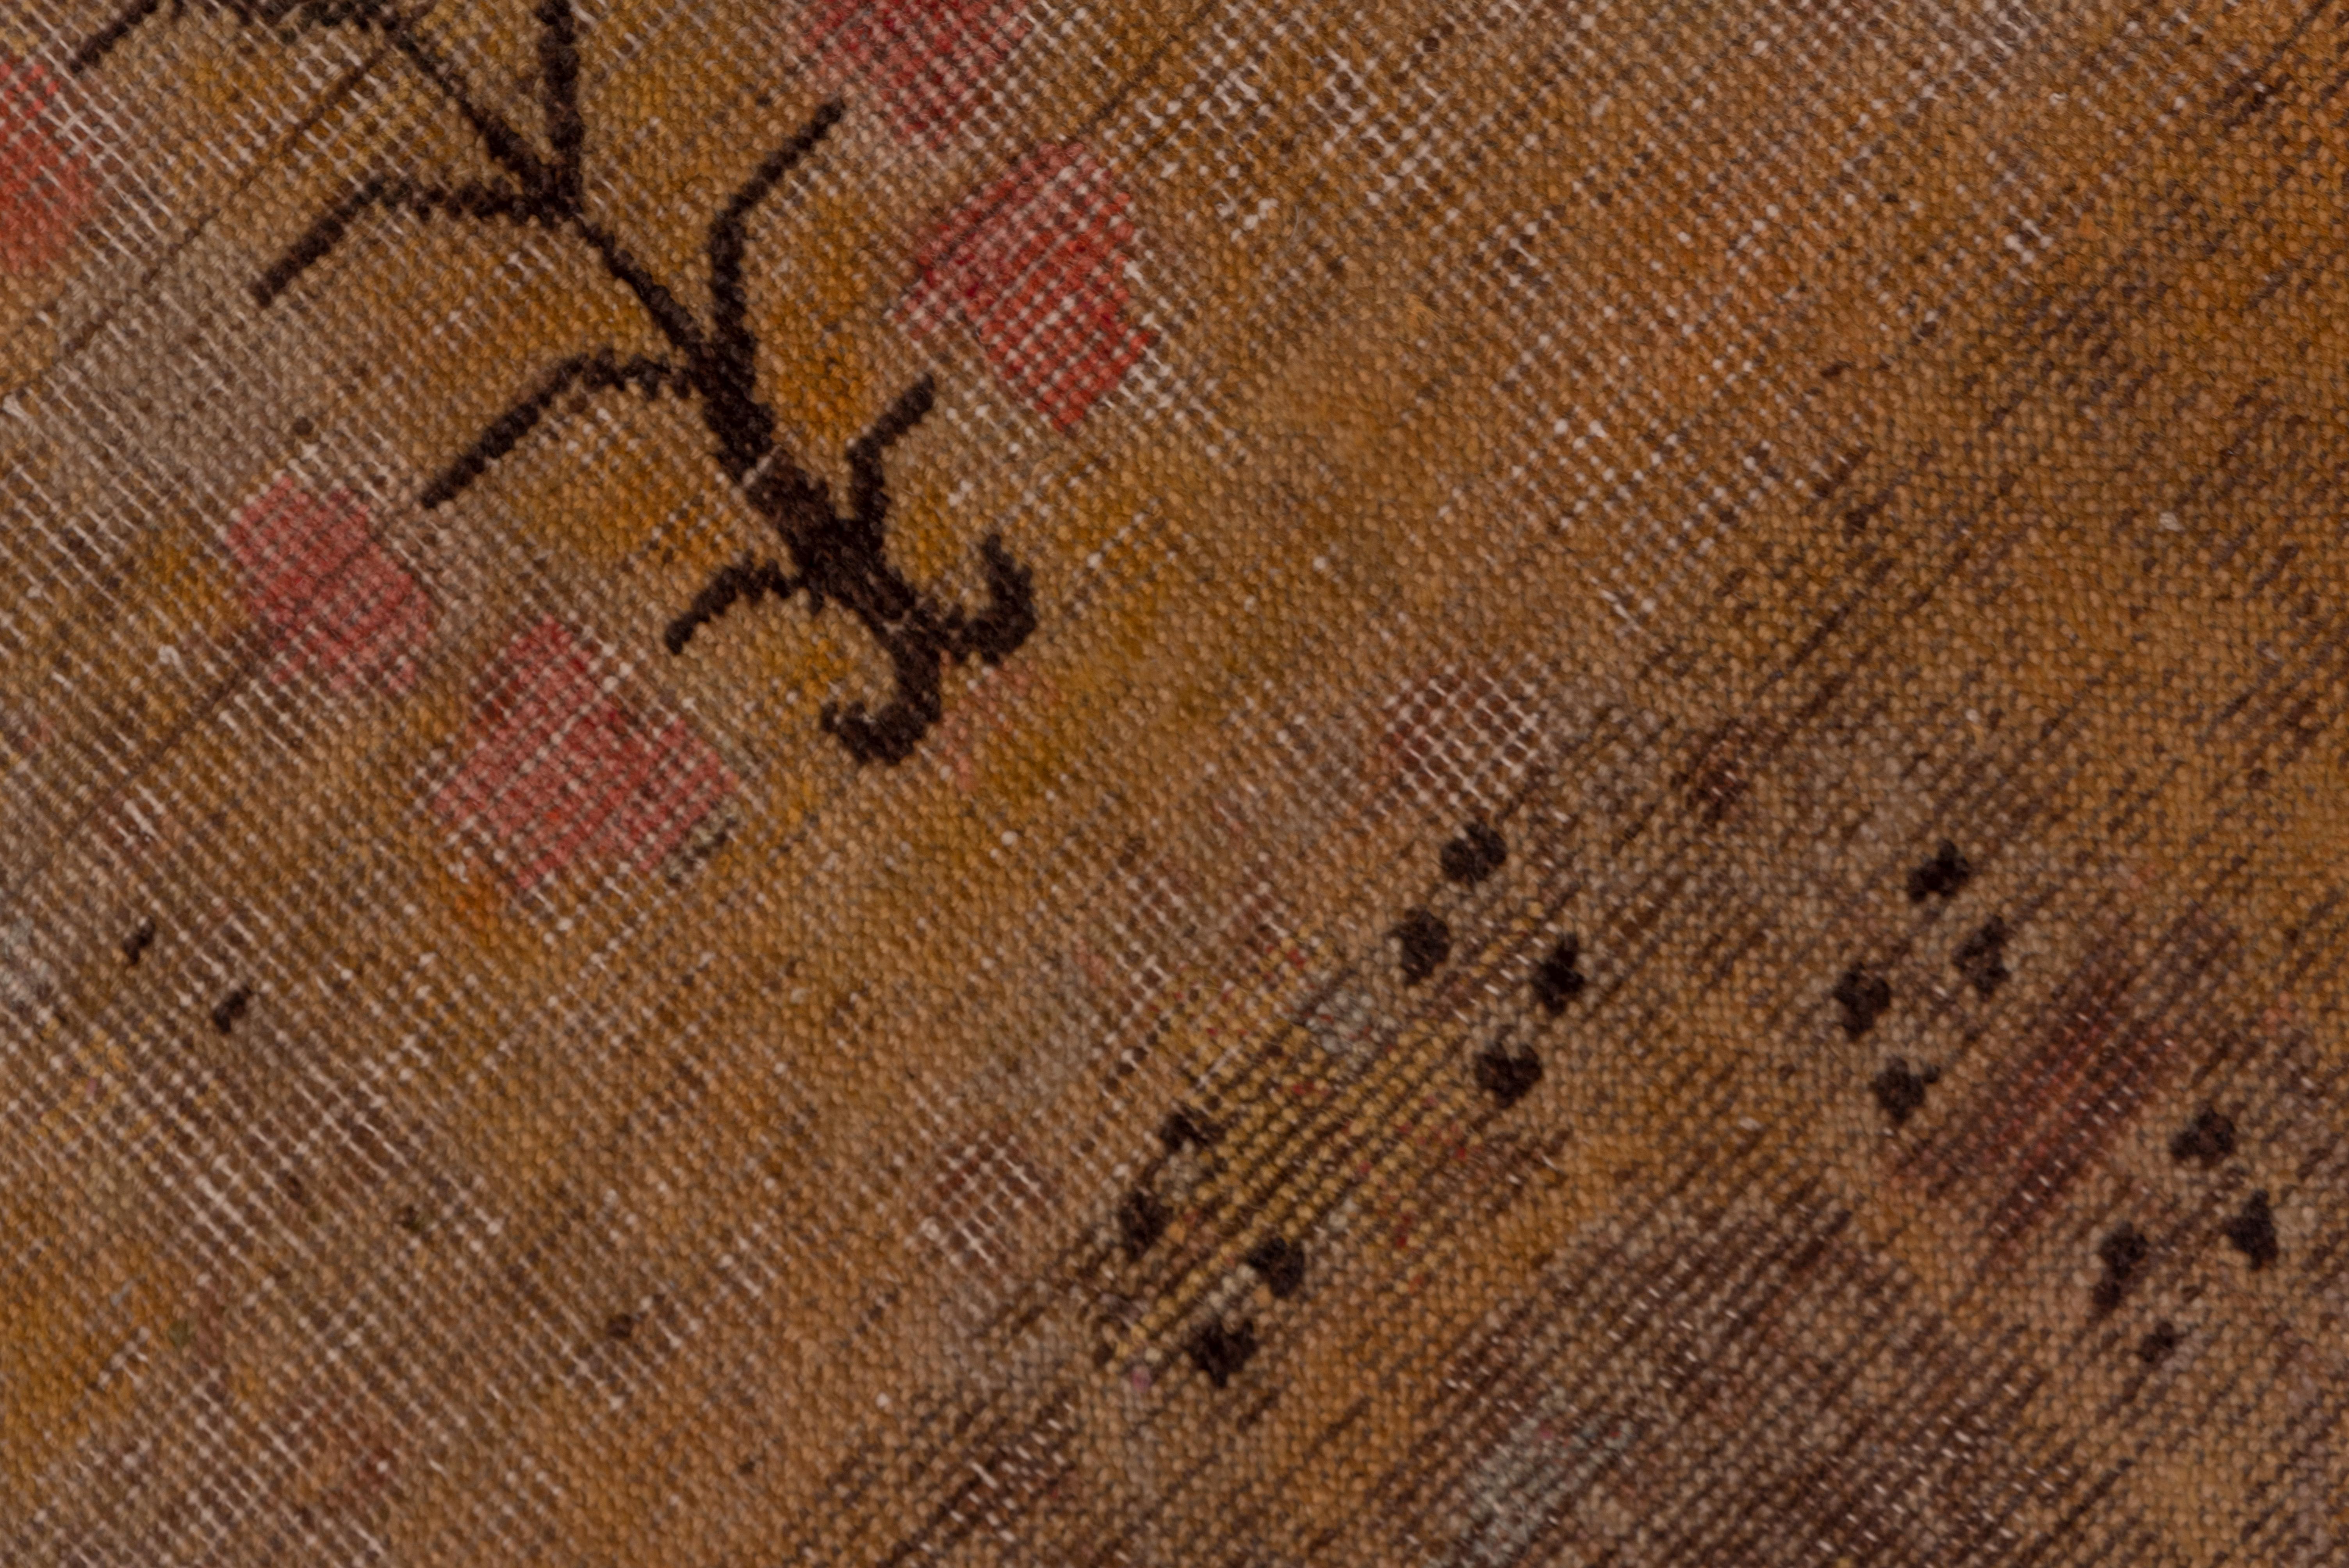 This east Turkestan oasis town rug still preserves a design in dark brown of volute knots, long-stemmed flowers, and a central small medallion, all on the straw ground. Brown accents the simplified Yun-Tsao Tou border. The palette is quite narrow.